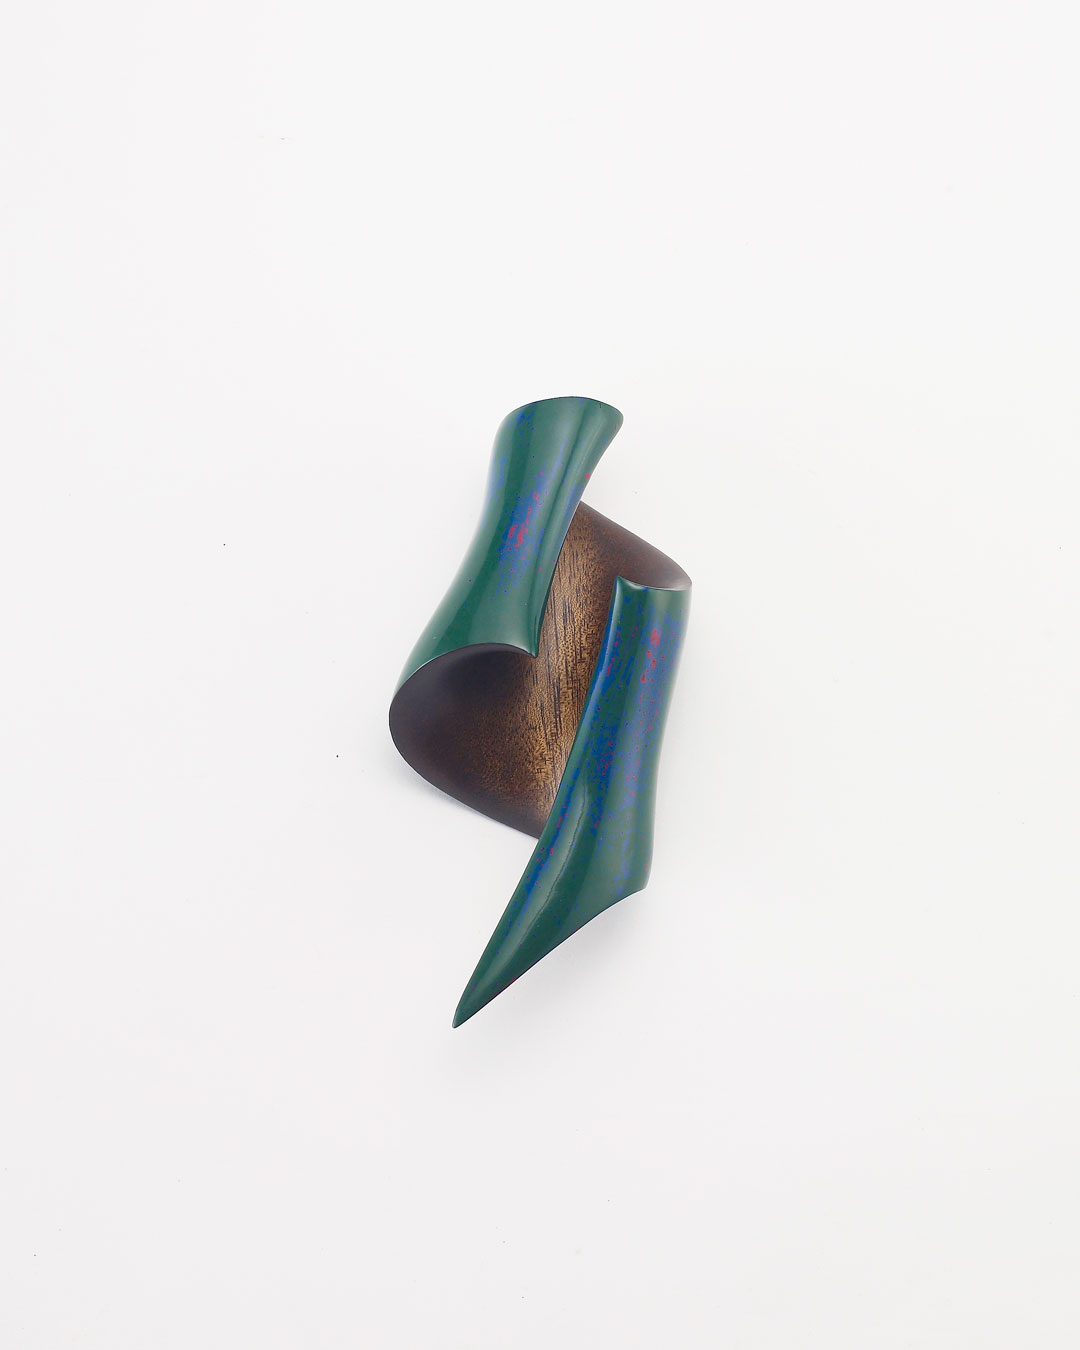 Joo Hyung Park, Confluence 5, 2018, brooch; Chinaberry wood, ottchil (lacquer), silver, 155 x 63 x 40 mm, €975